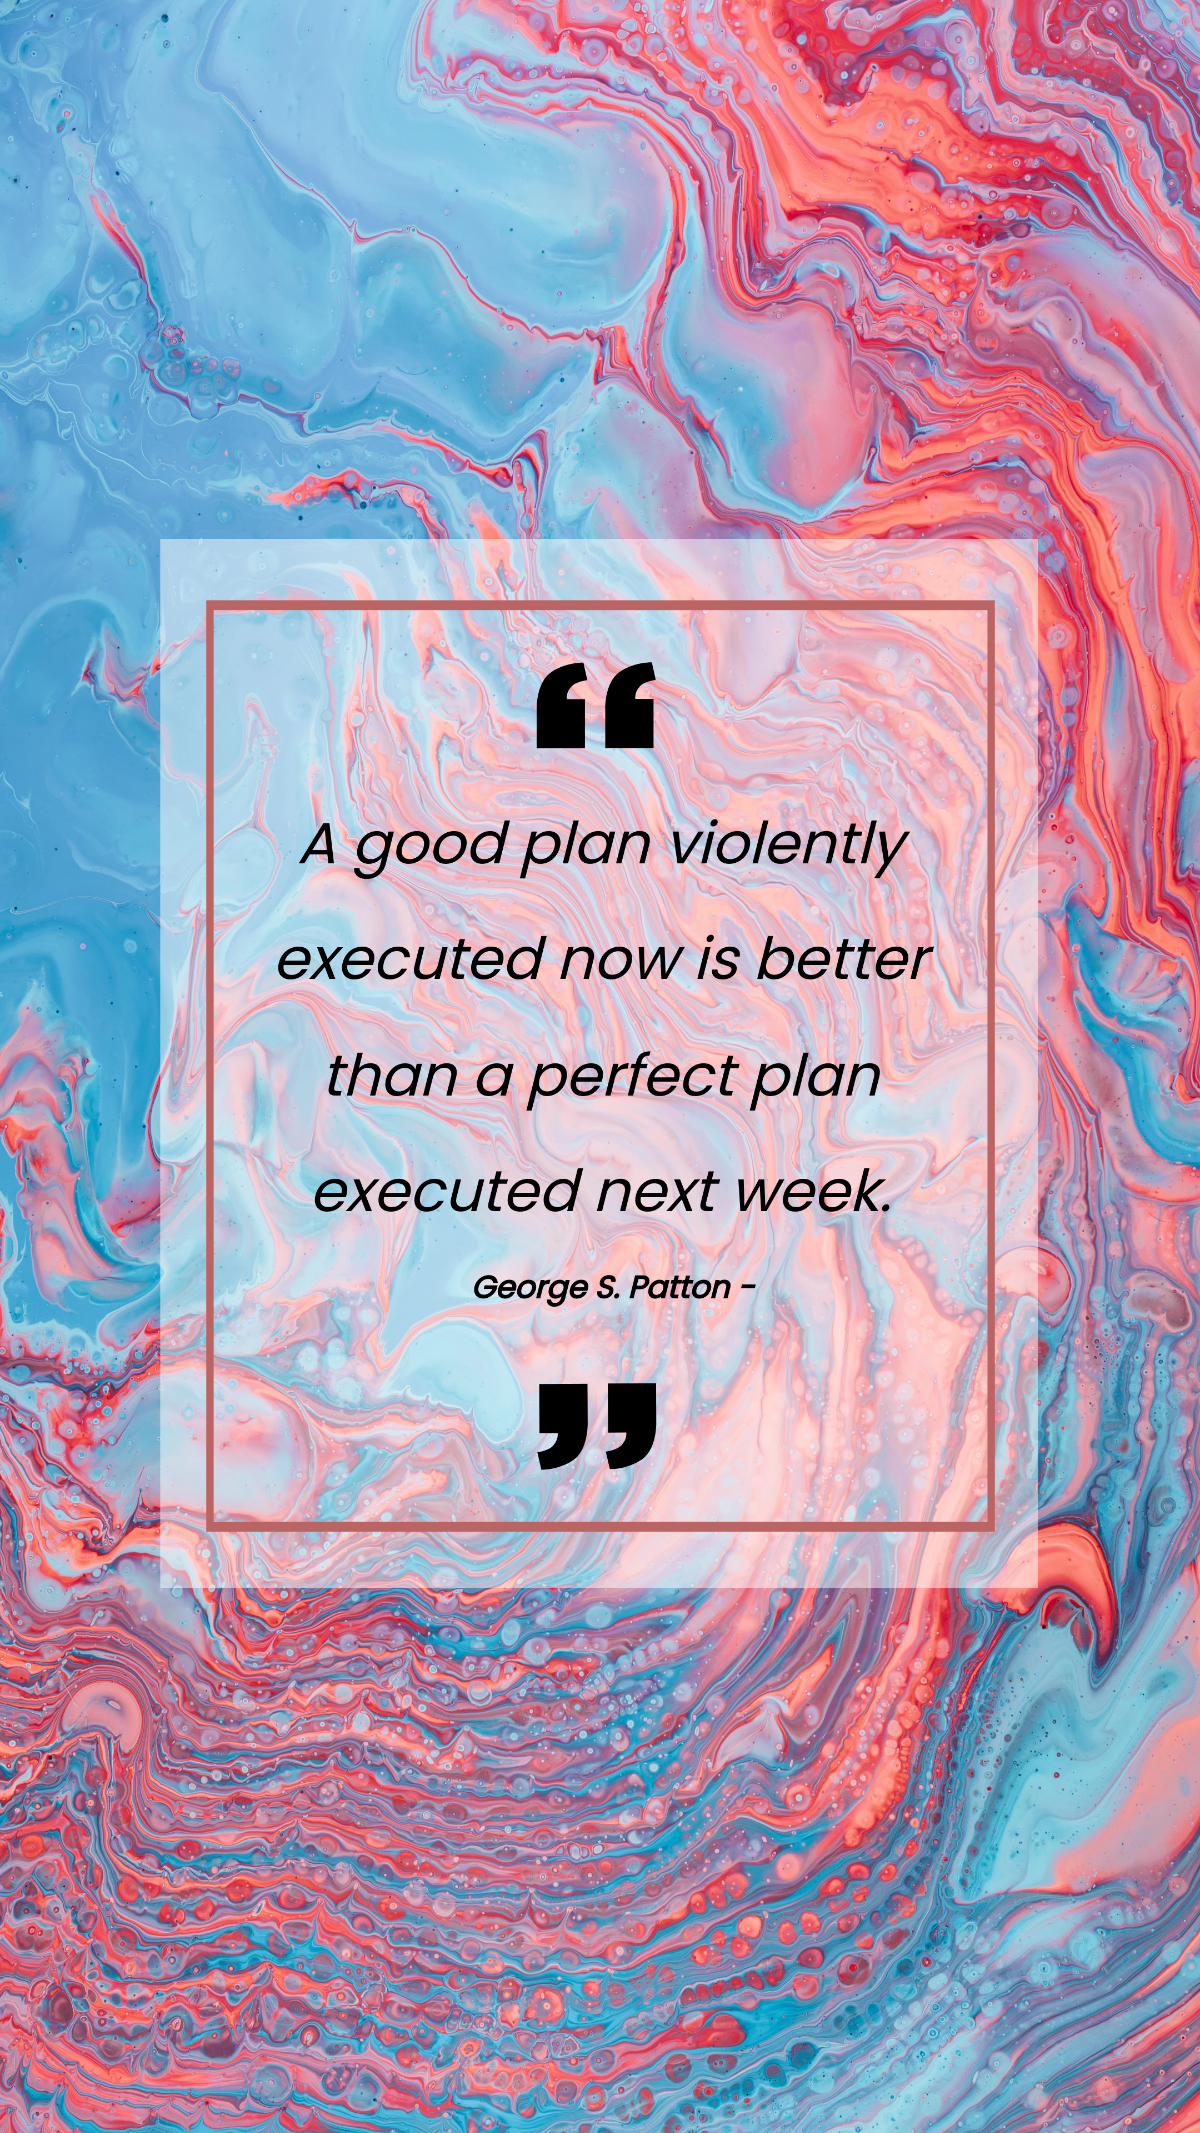 George S. Patton - A good plan violently executed now is better than a perfect plan executed next week. Template